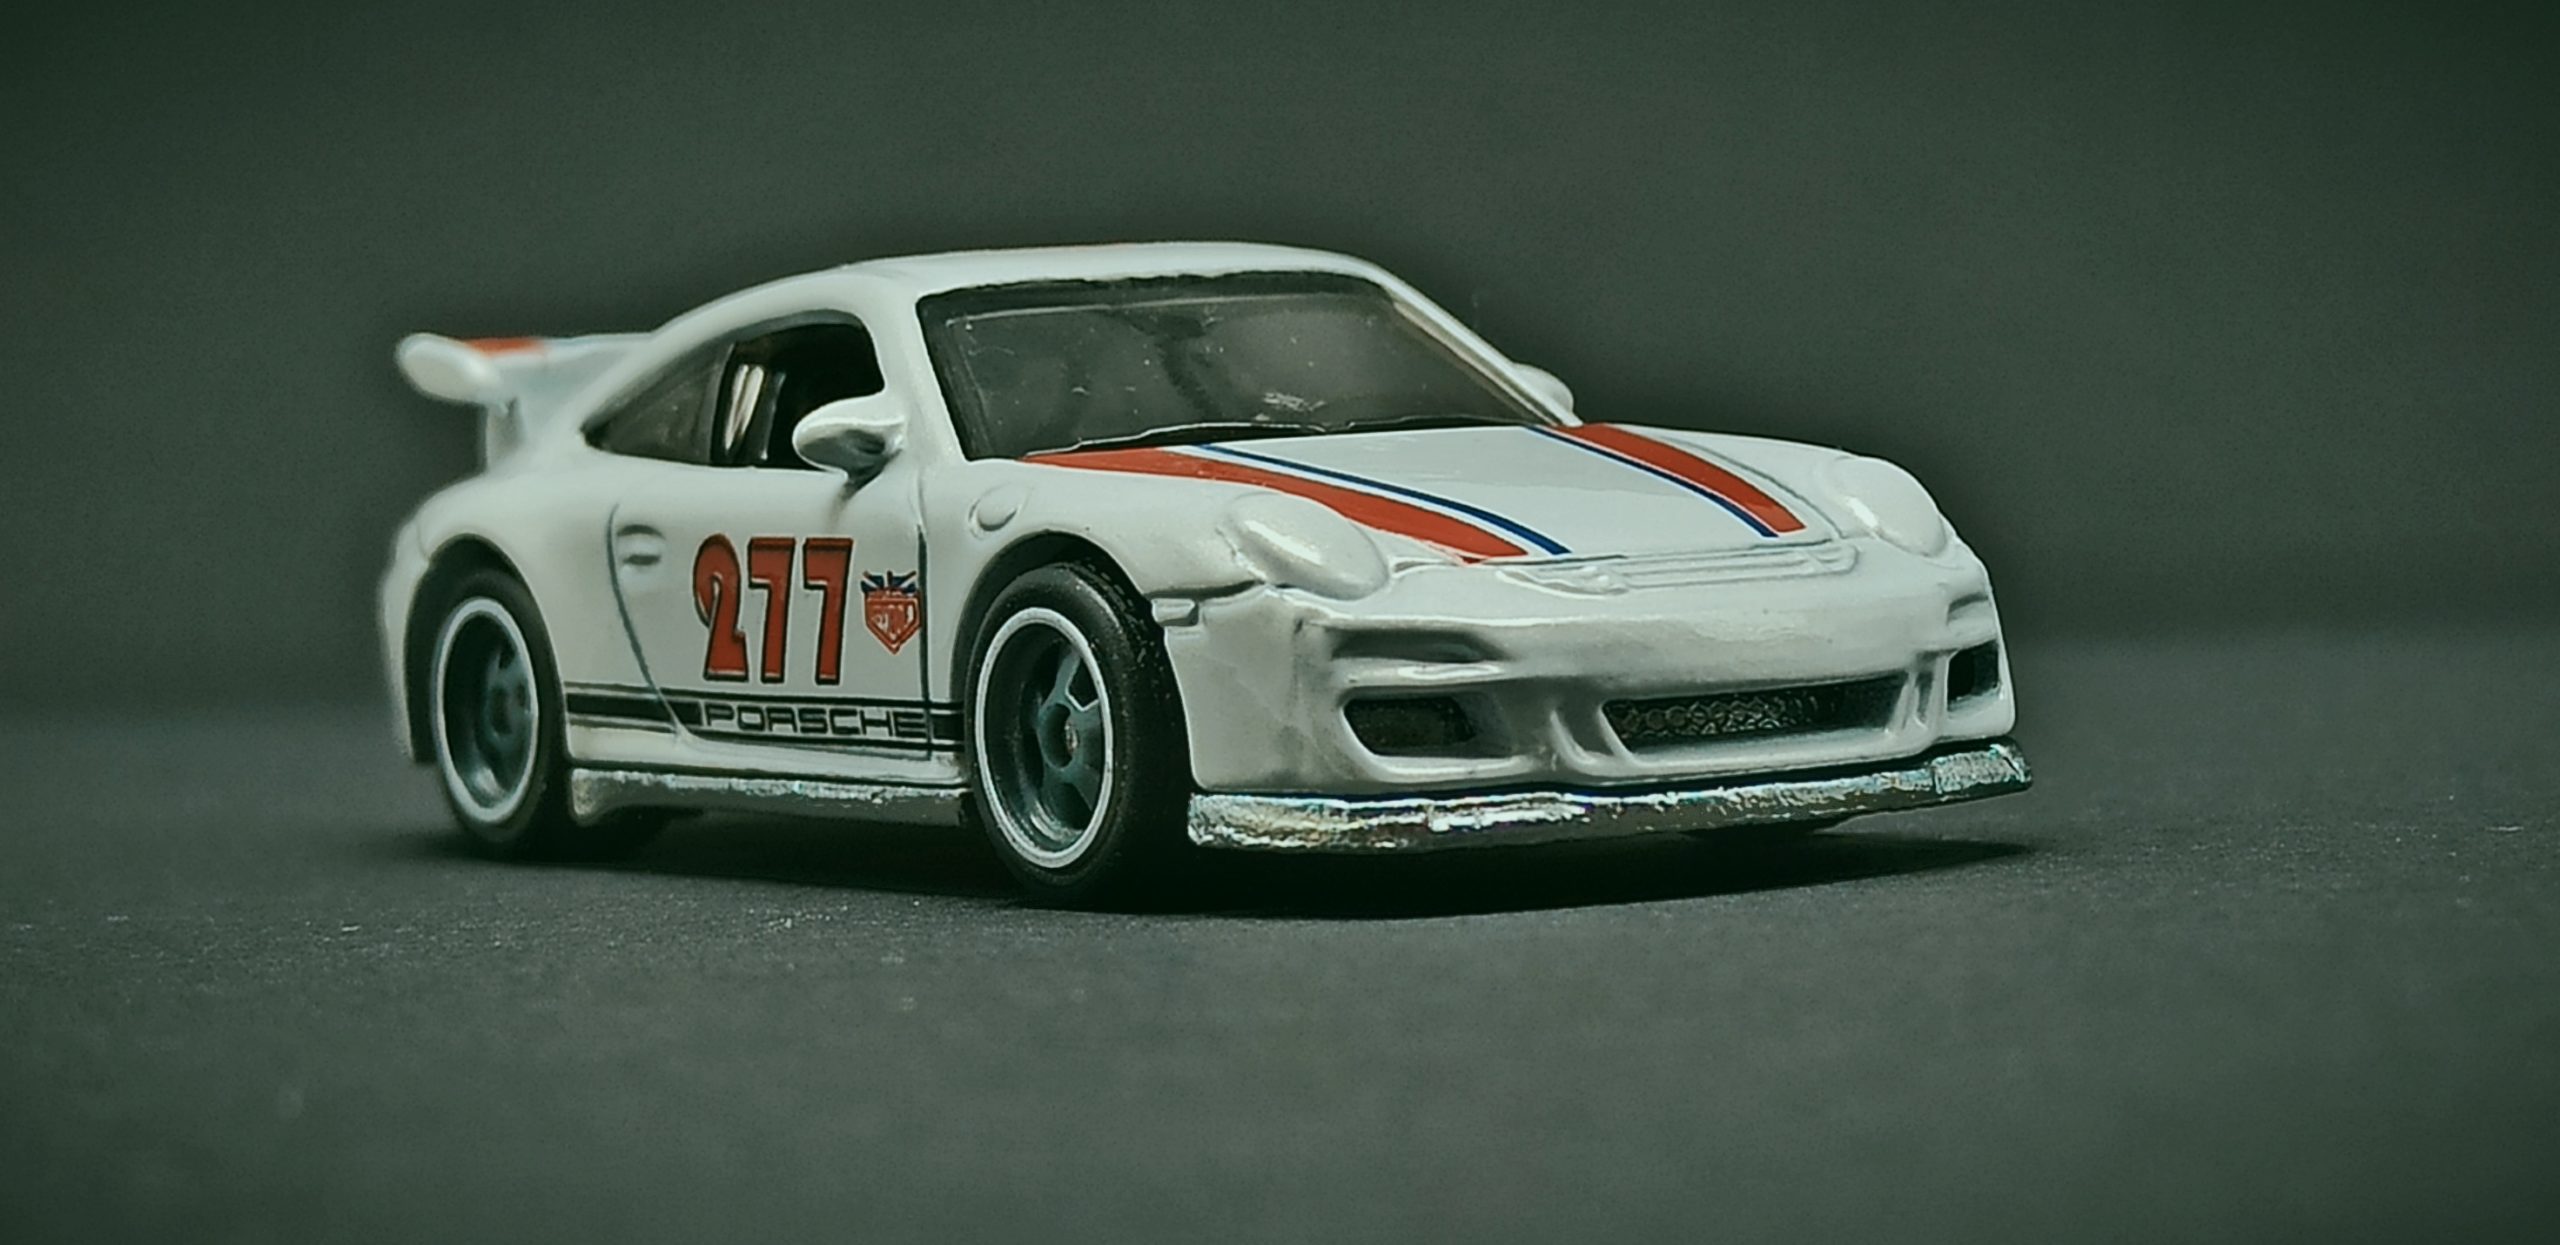 Hot Wheels Porsche 911 GT3 RS (2011 model) (DJF85) 2016 Car Culture: Euro Style (2/5) pearl white Magnus Walker Urban Outlaw front angle